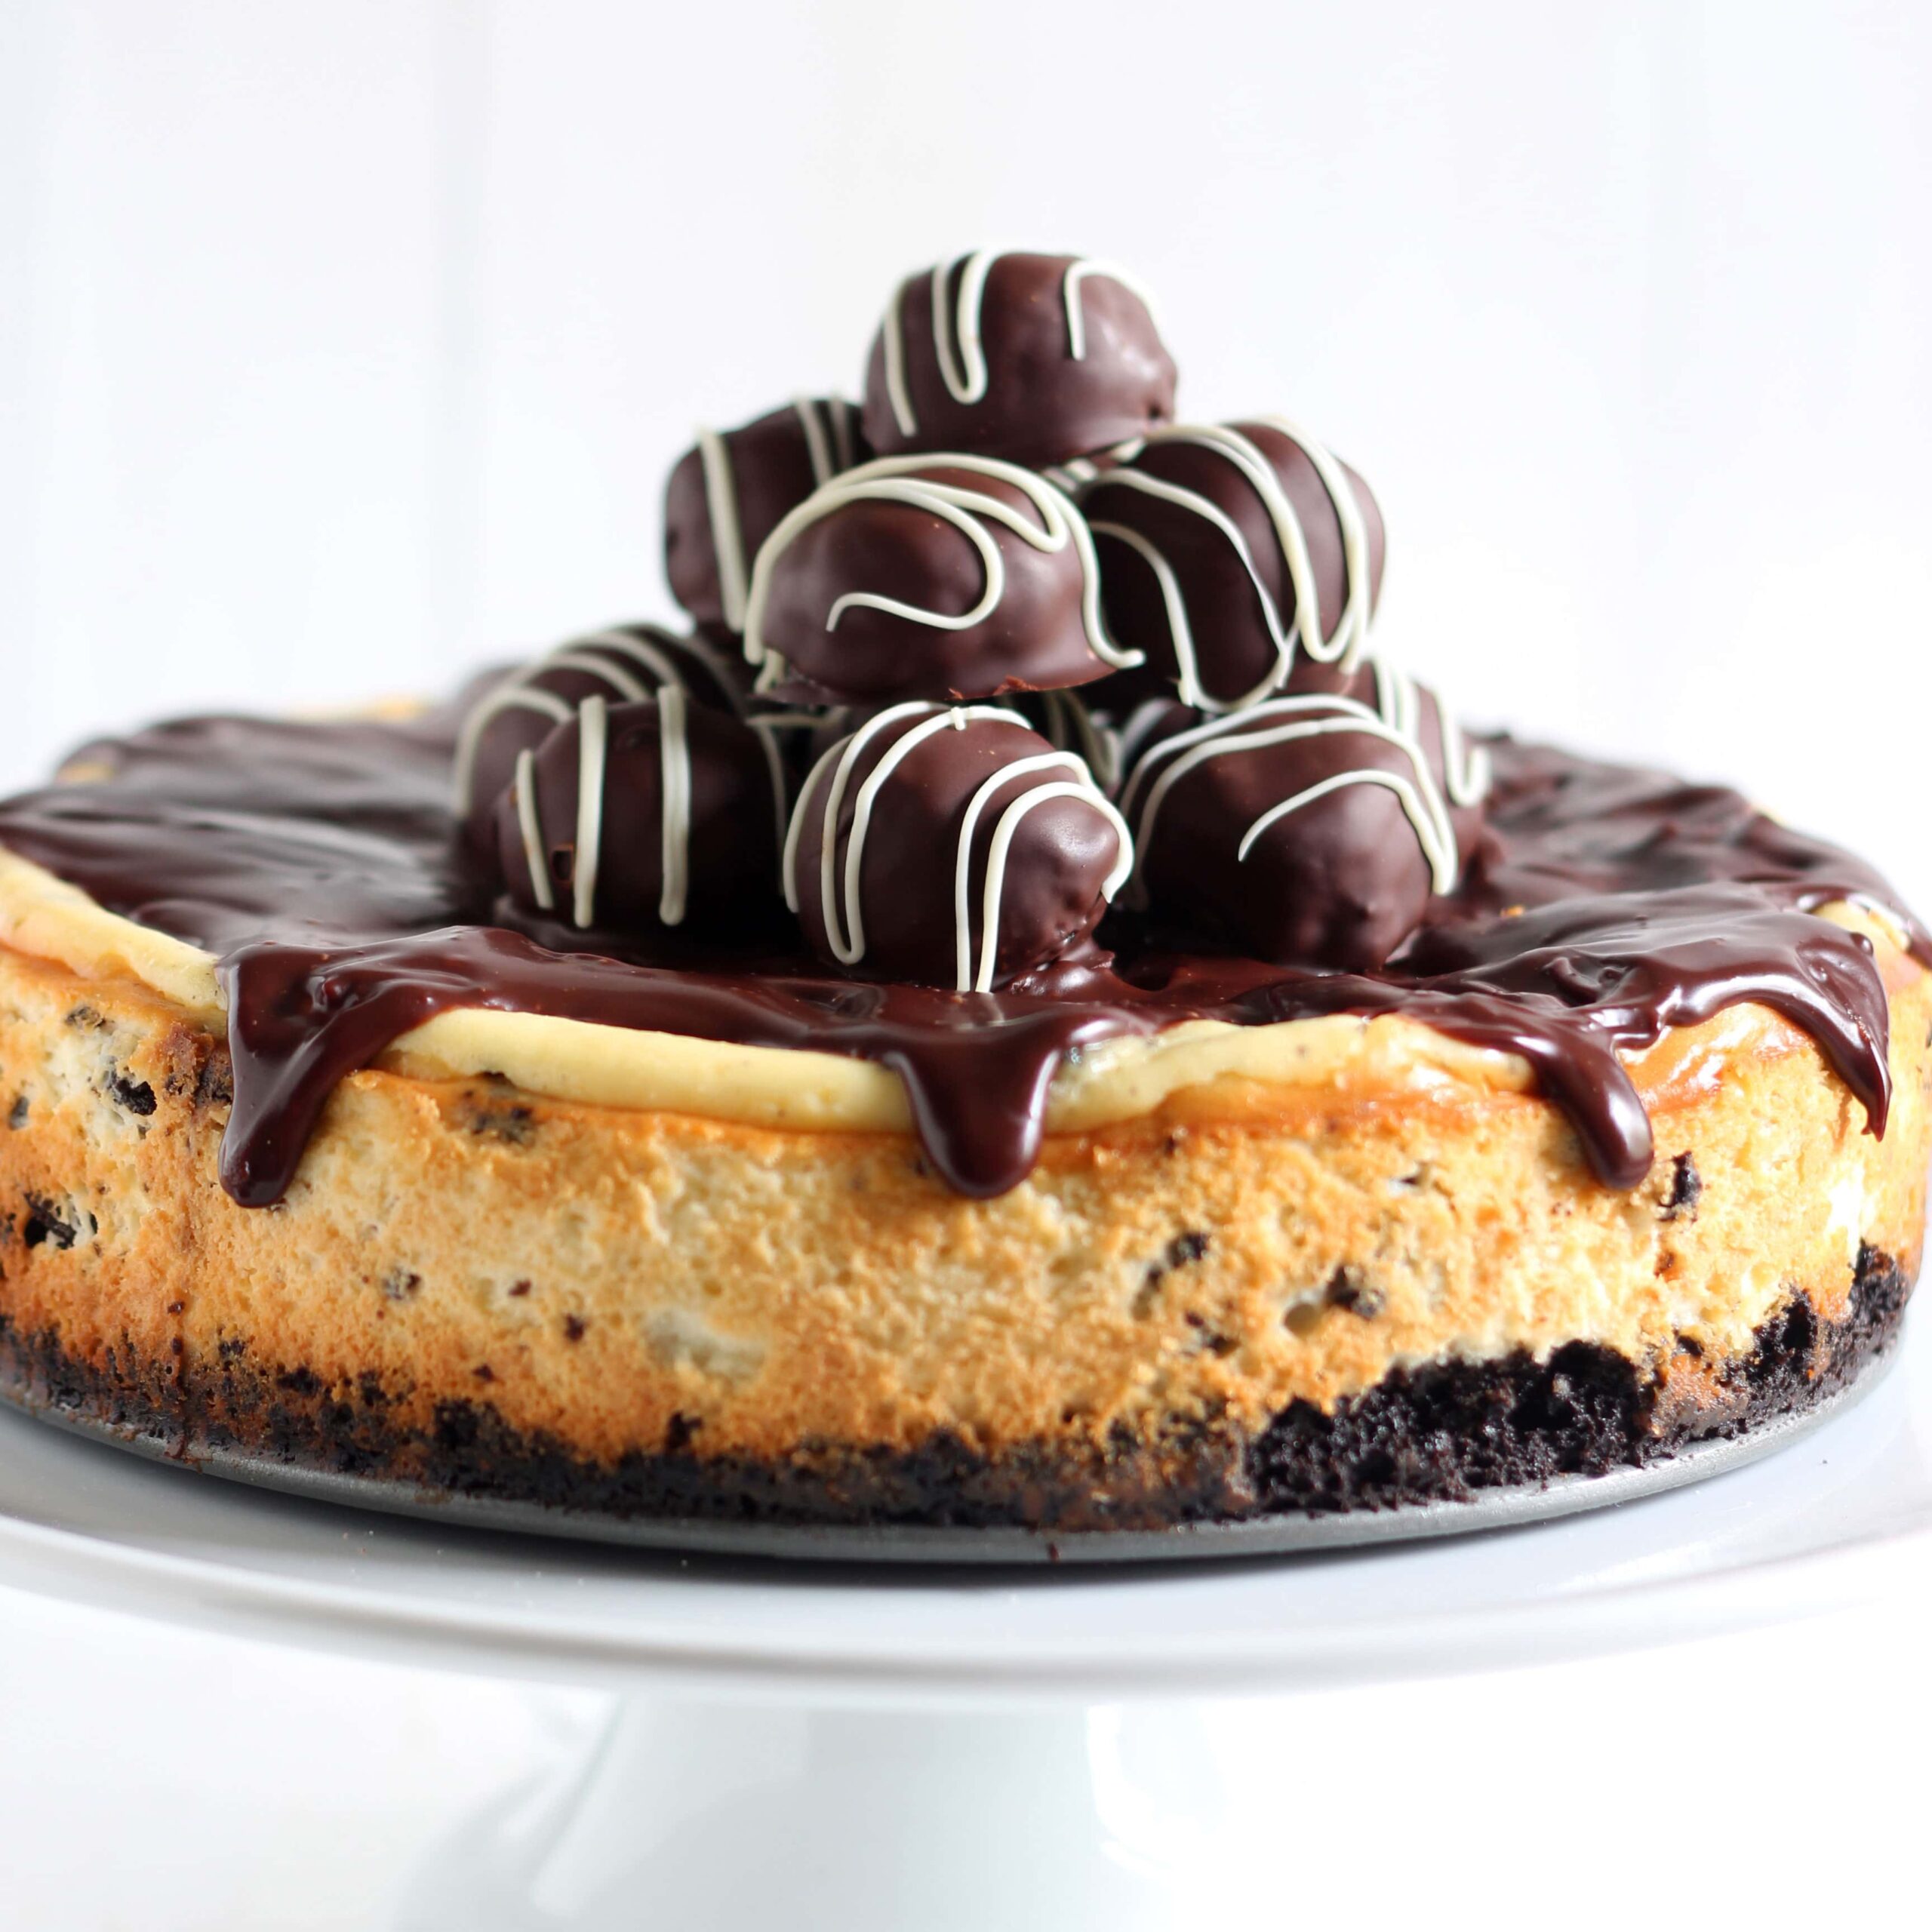 Oreo Truffle Cheesecake is a completely over-the-top sinful dessert with an Oreo crust, Oreo cheesecake filling, chocolate ganache, and Oreo truffles on top! Holy YUM.